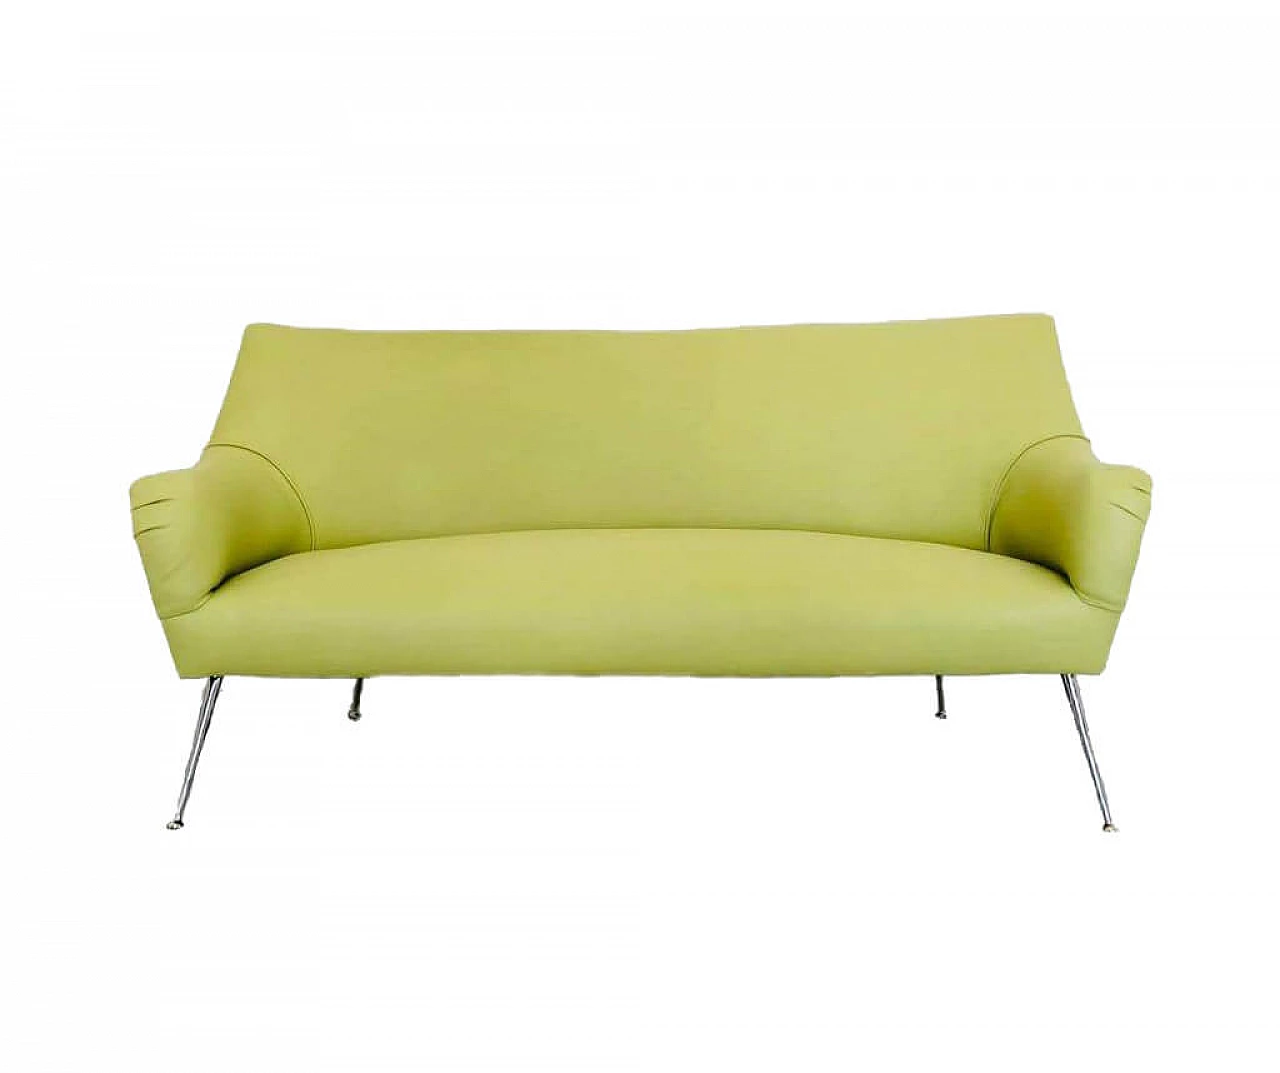 2 seater sofa, lined in lime green leather, 1950s 1066917